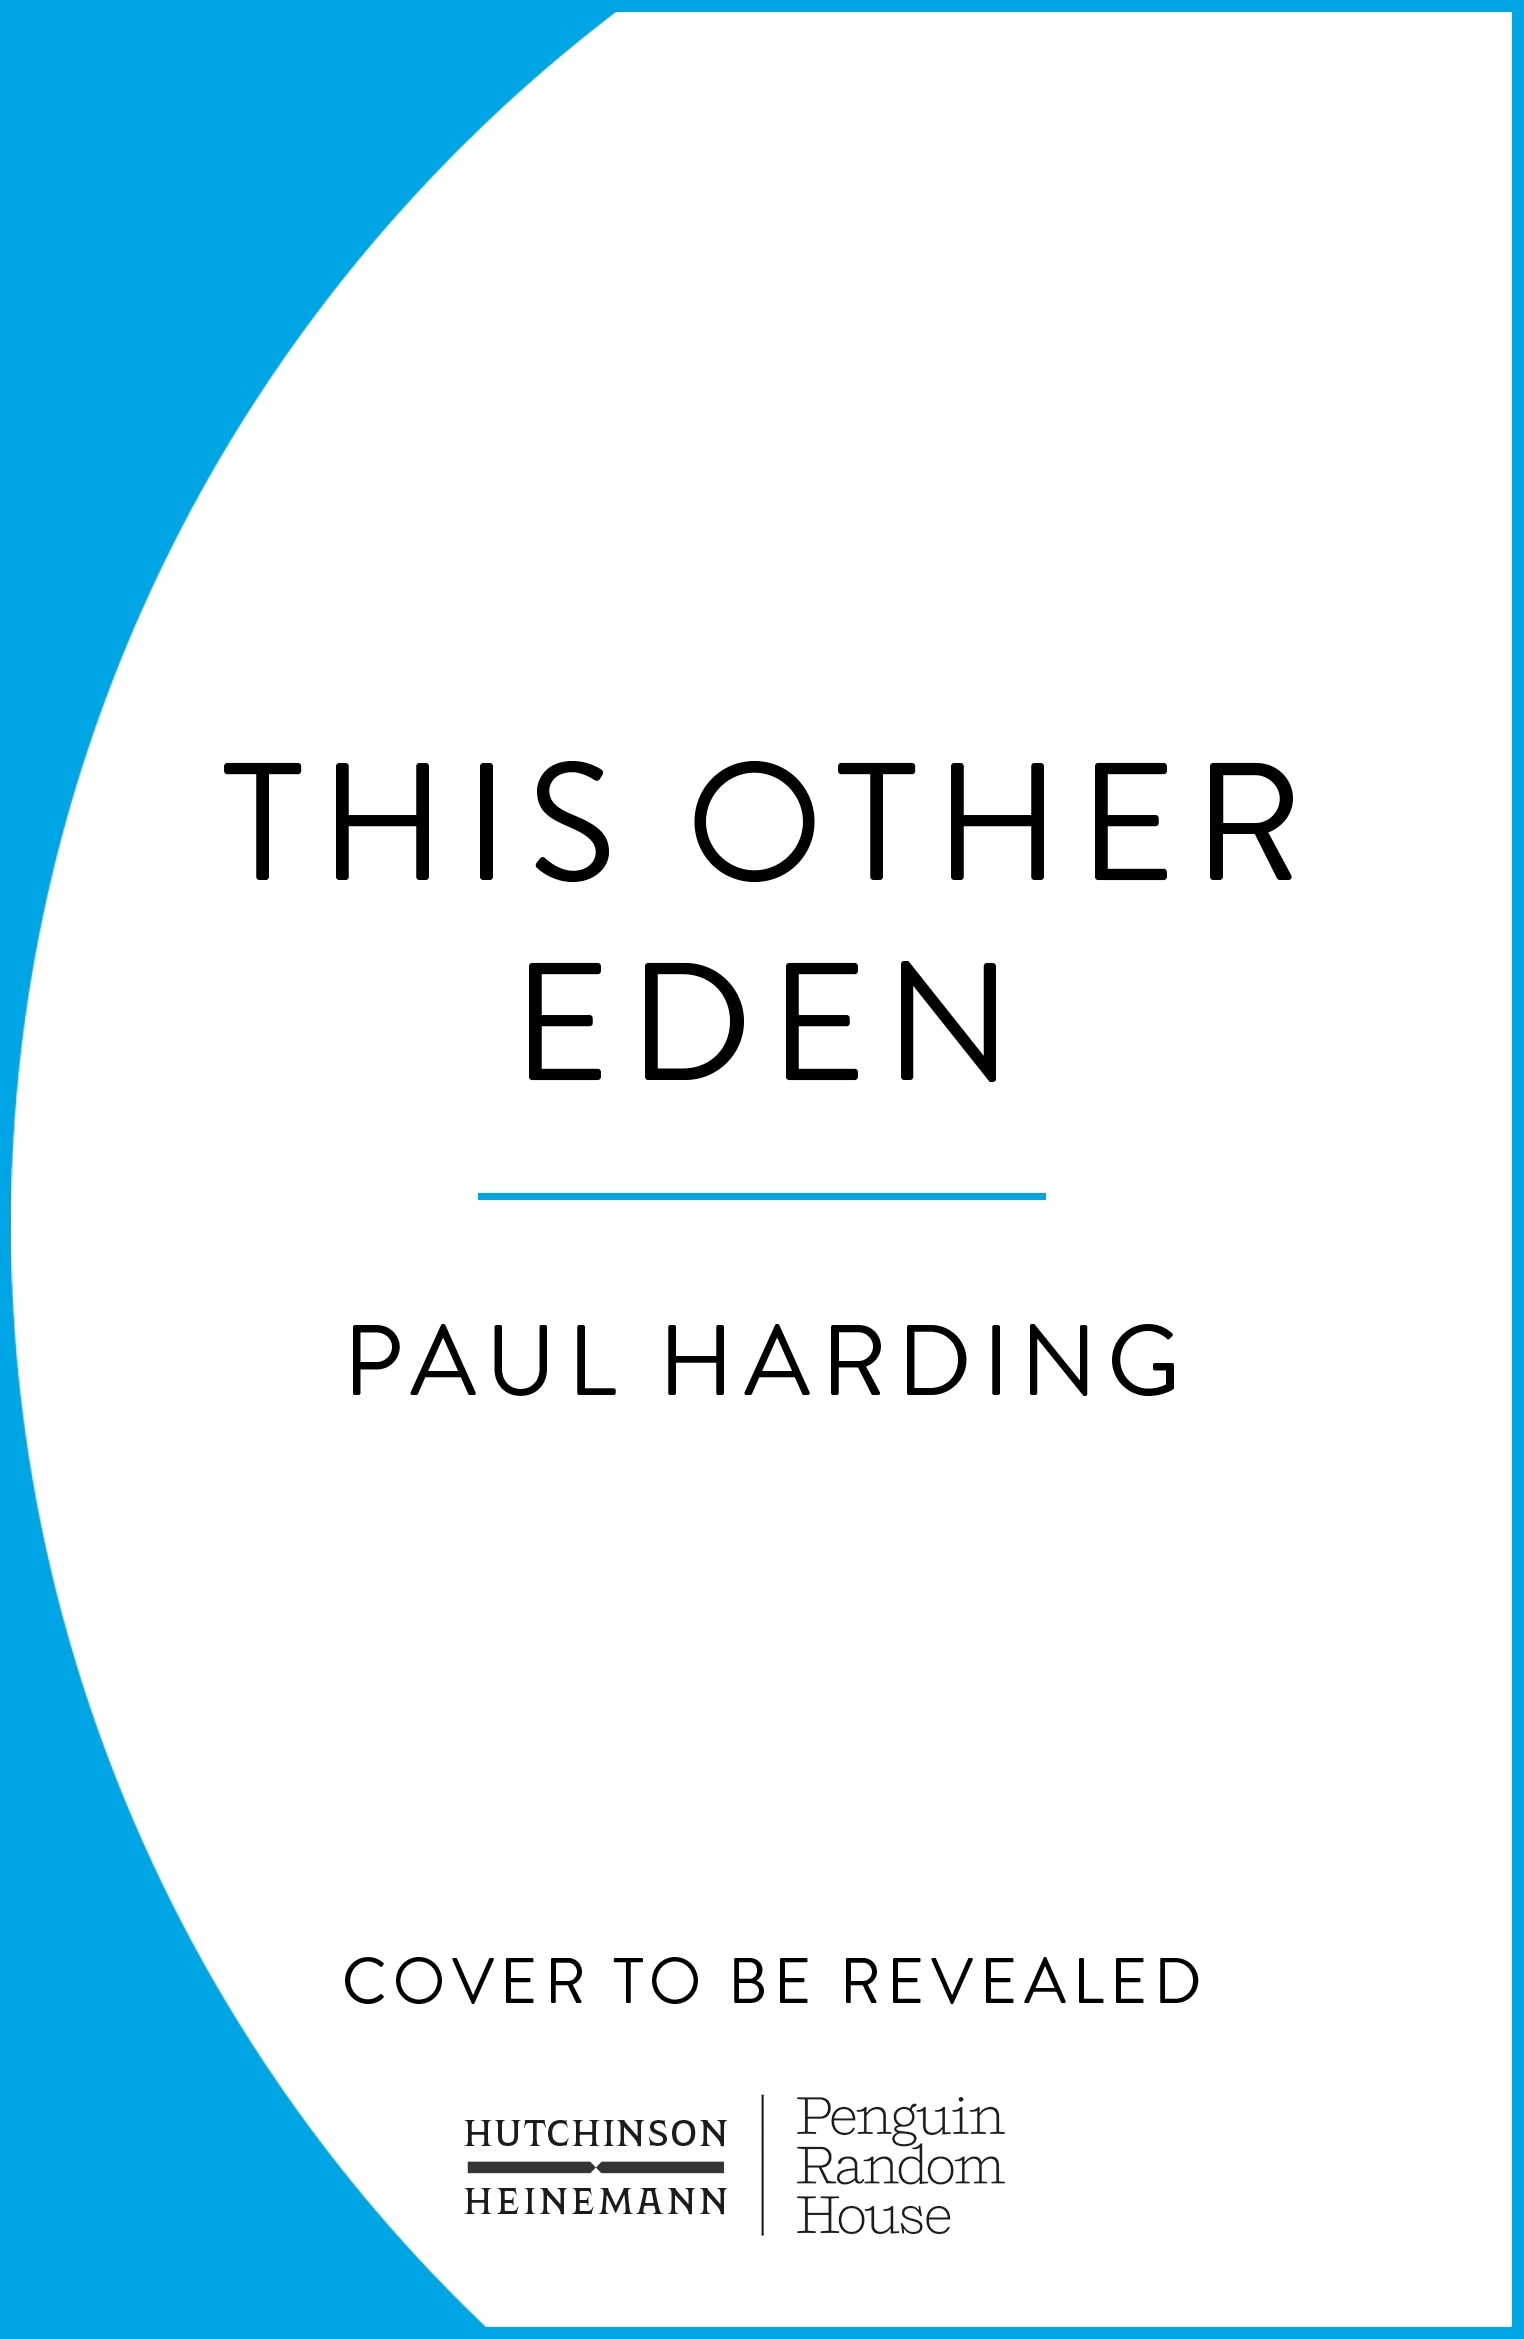 Book “This Other Eden” by Paul Harding — February 9, 2023